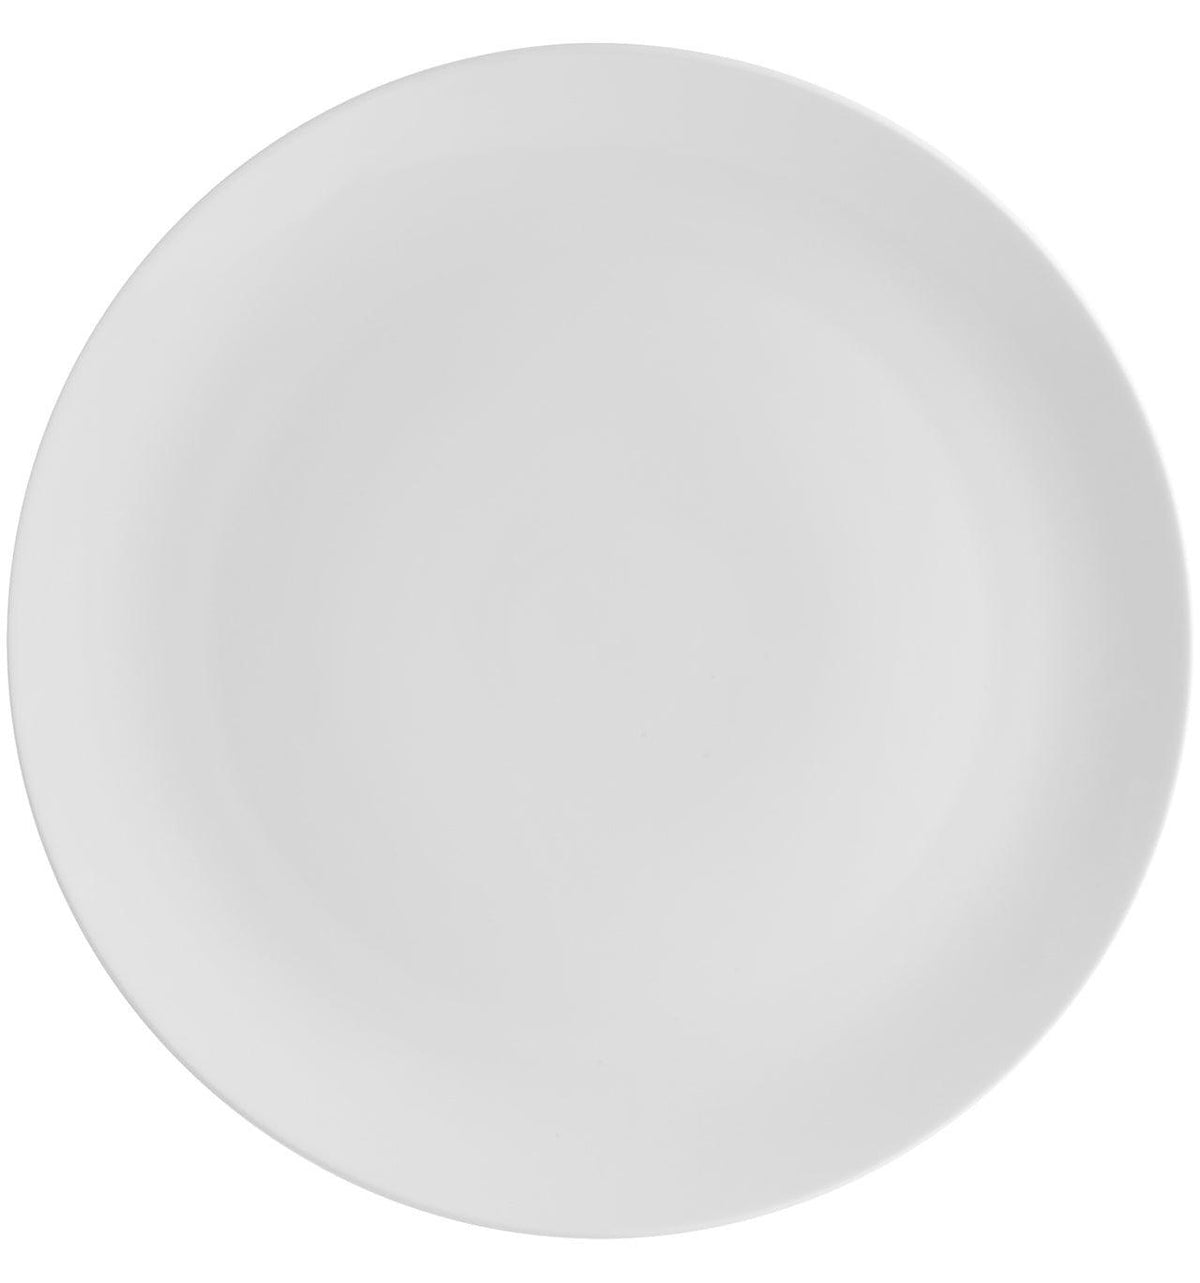 Broadway White - Charger Plate (4 plates) - LAZADO